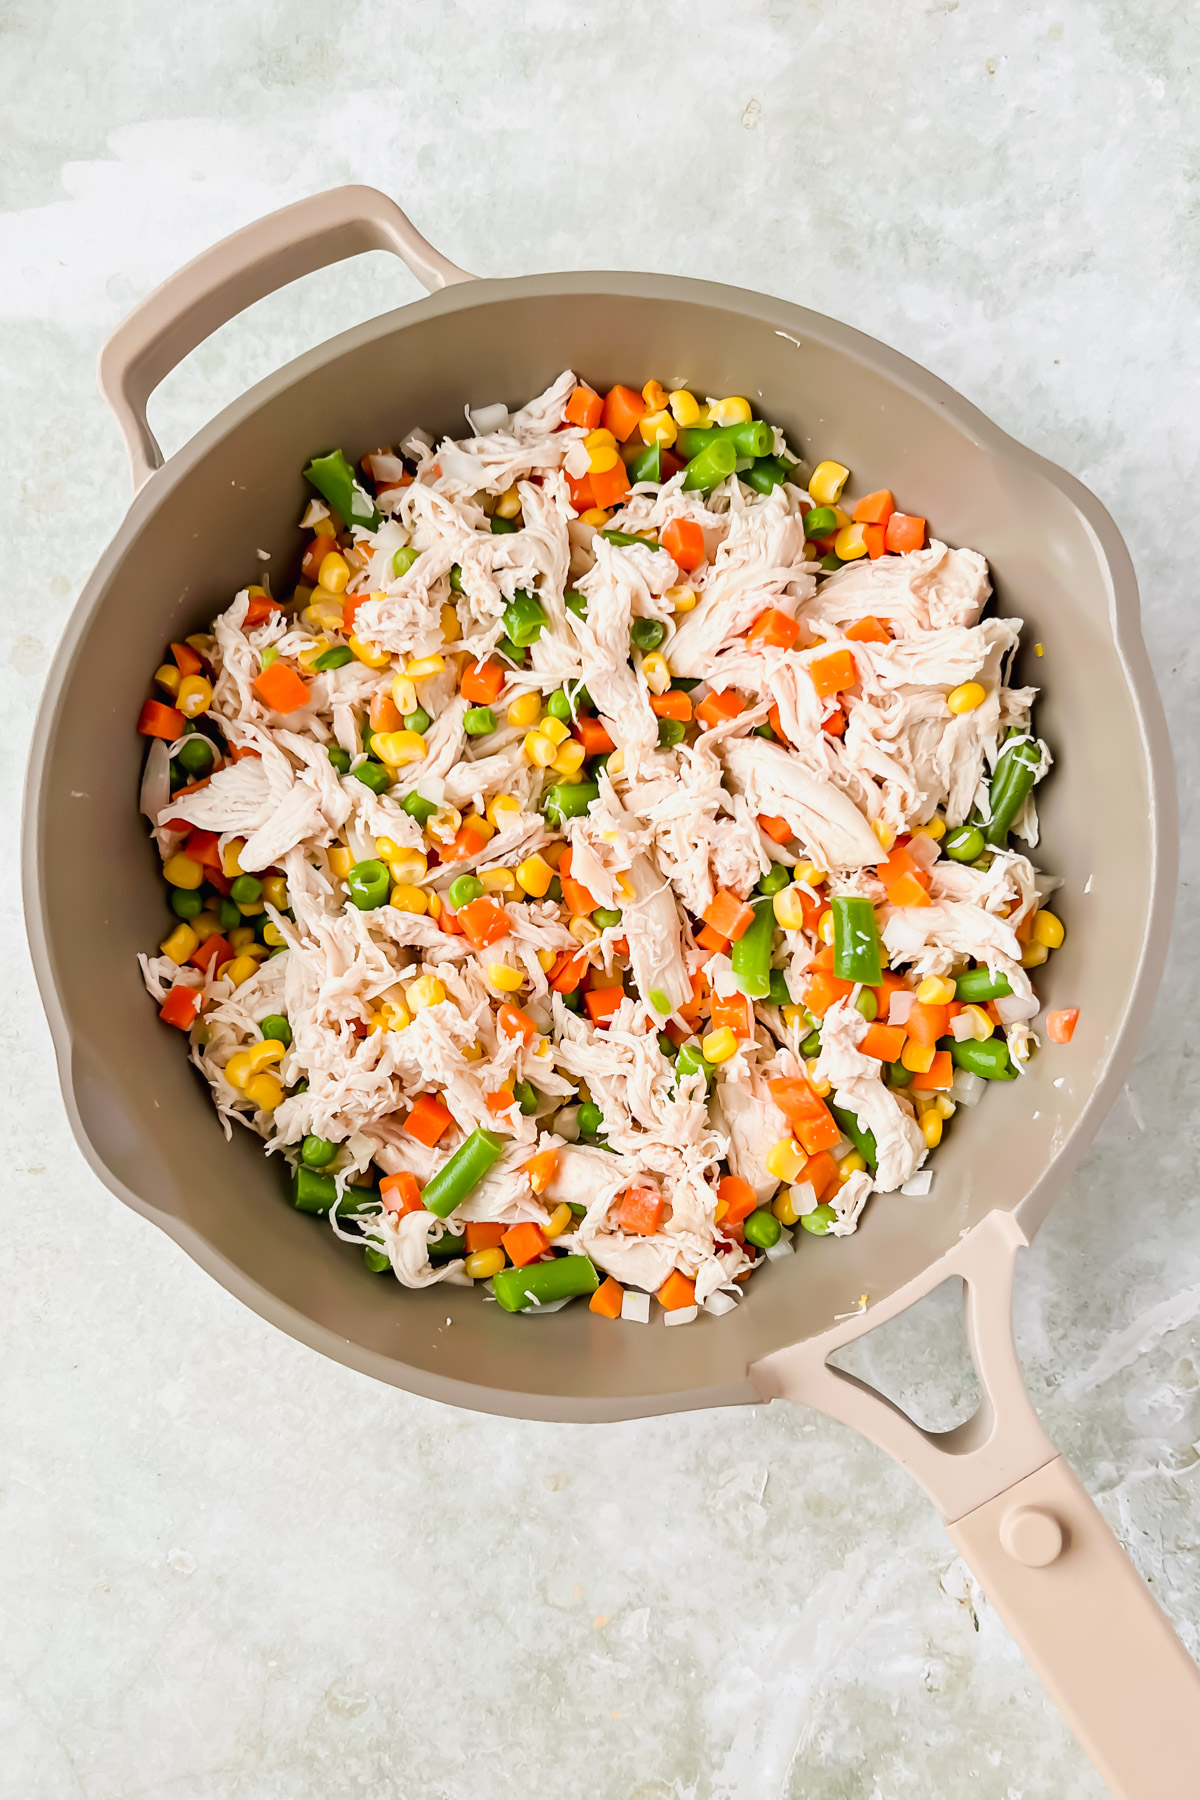 shredded chicken and mixed veggies in tan skillet.